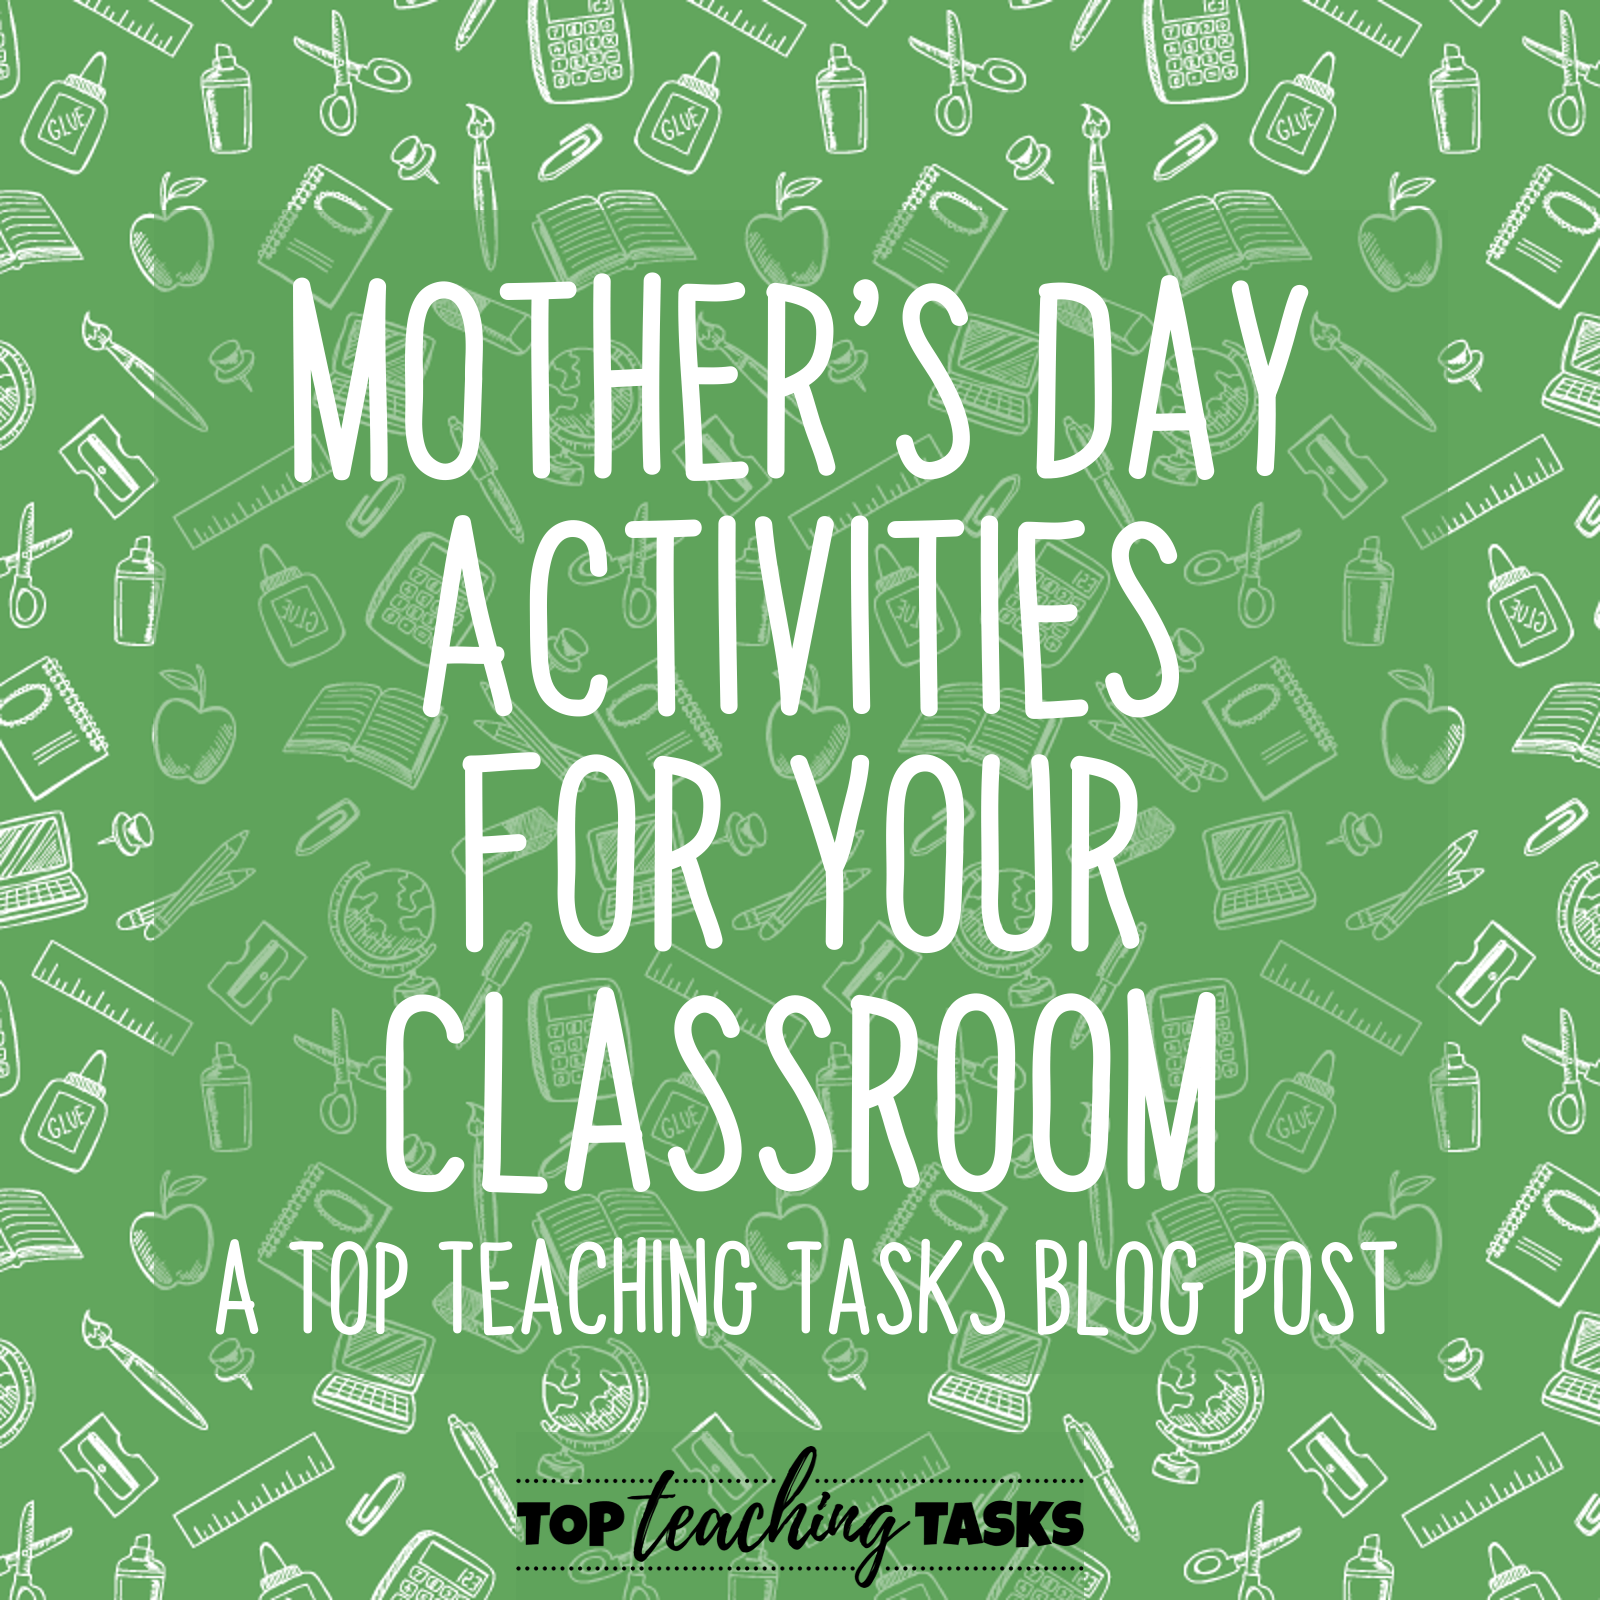 mother-s-day-activities-for-your-classroom-top-teaching-tasks